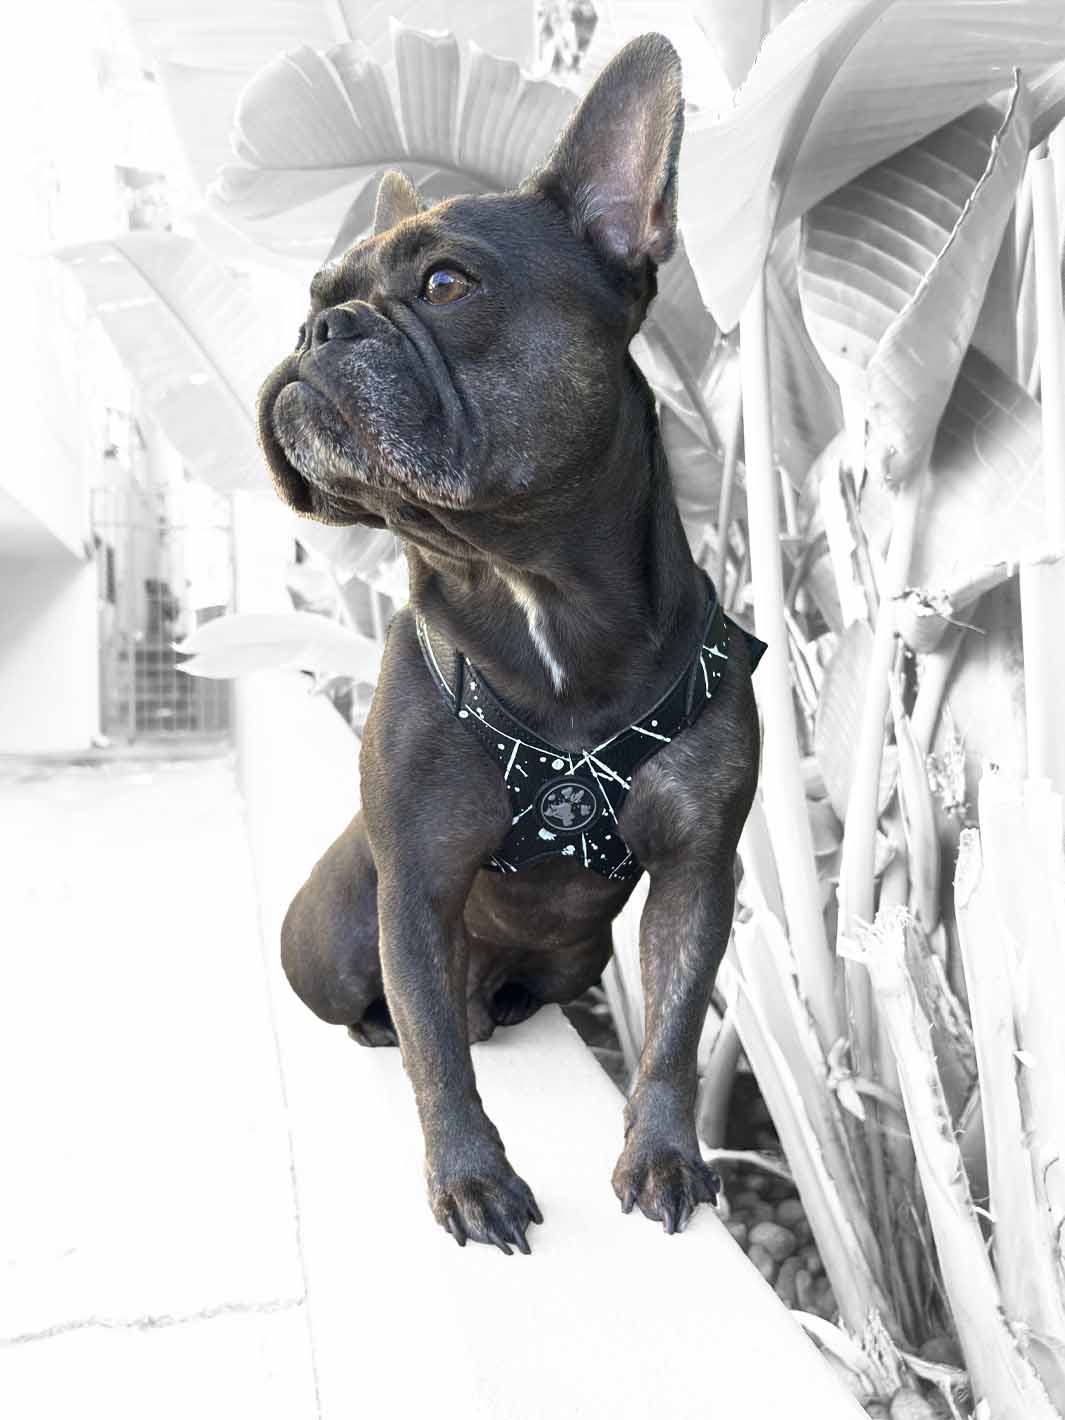 The MAGNUS Canis black vegan leather frenchie harness worn by a cute small dog sitting.